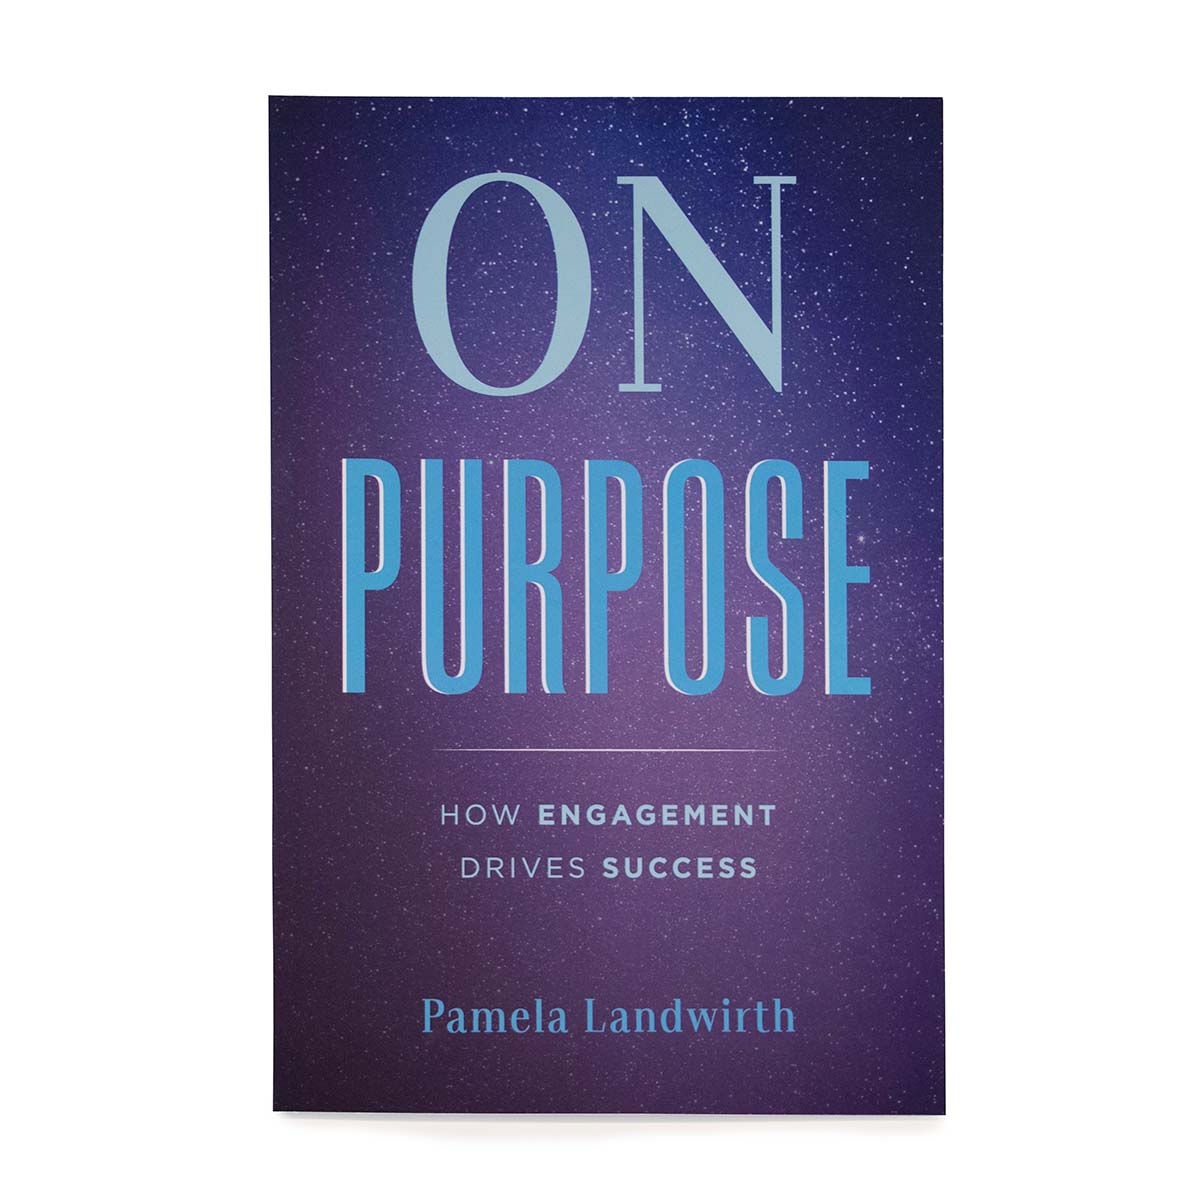 On Purpose - How Engagement Drives Success